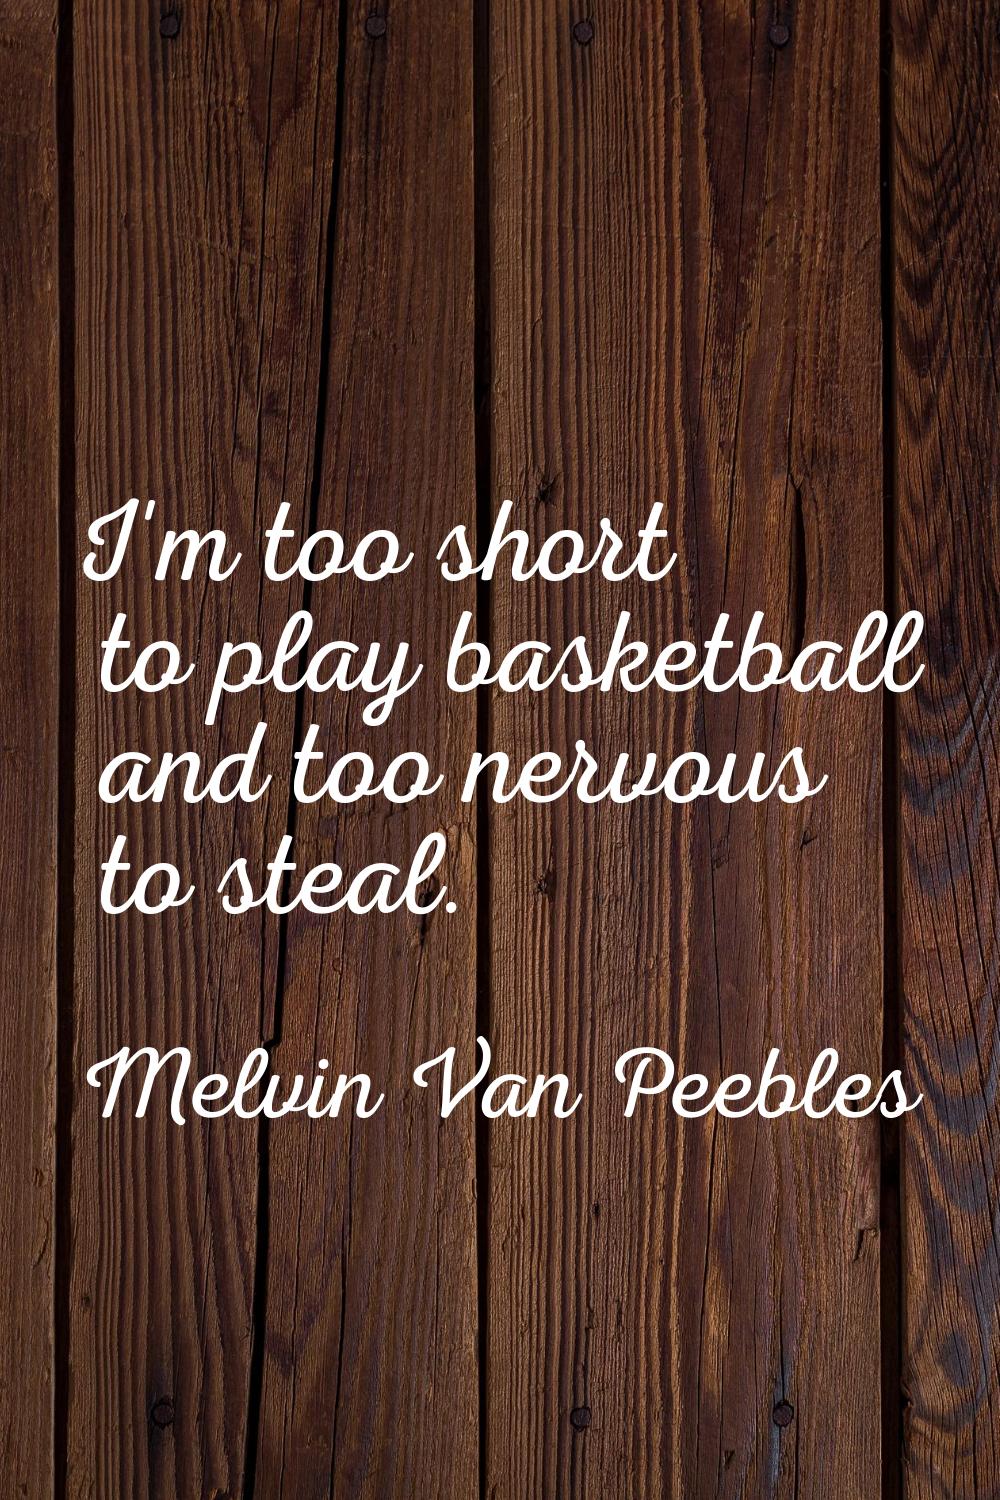 I'm too short to play basketball and too nervous to steal.